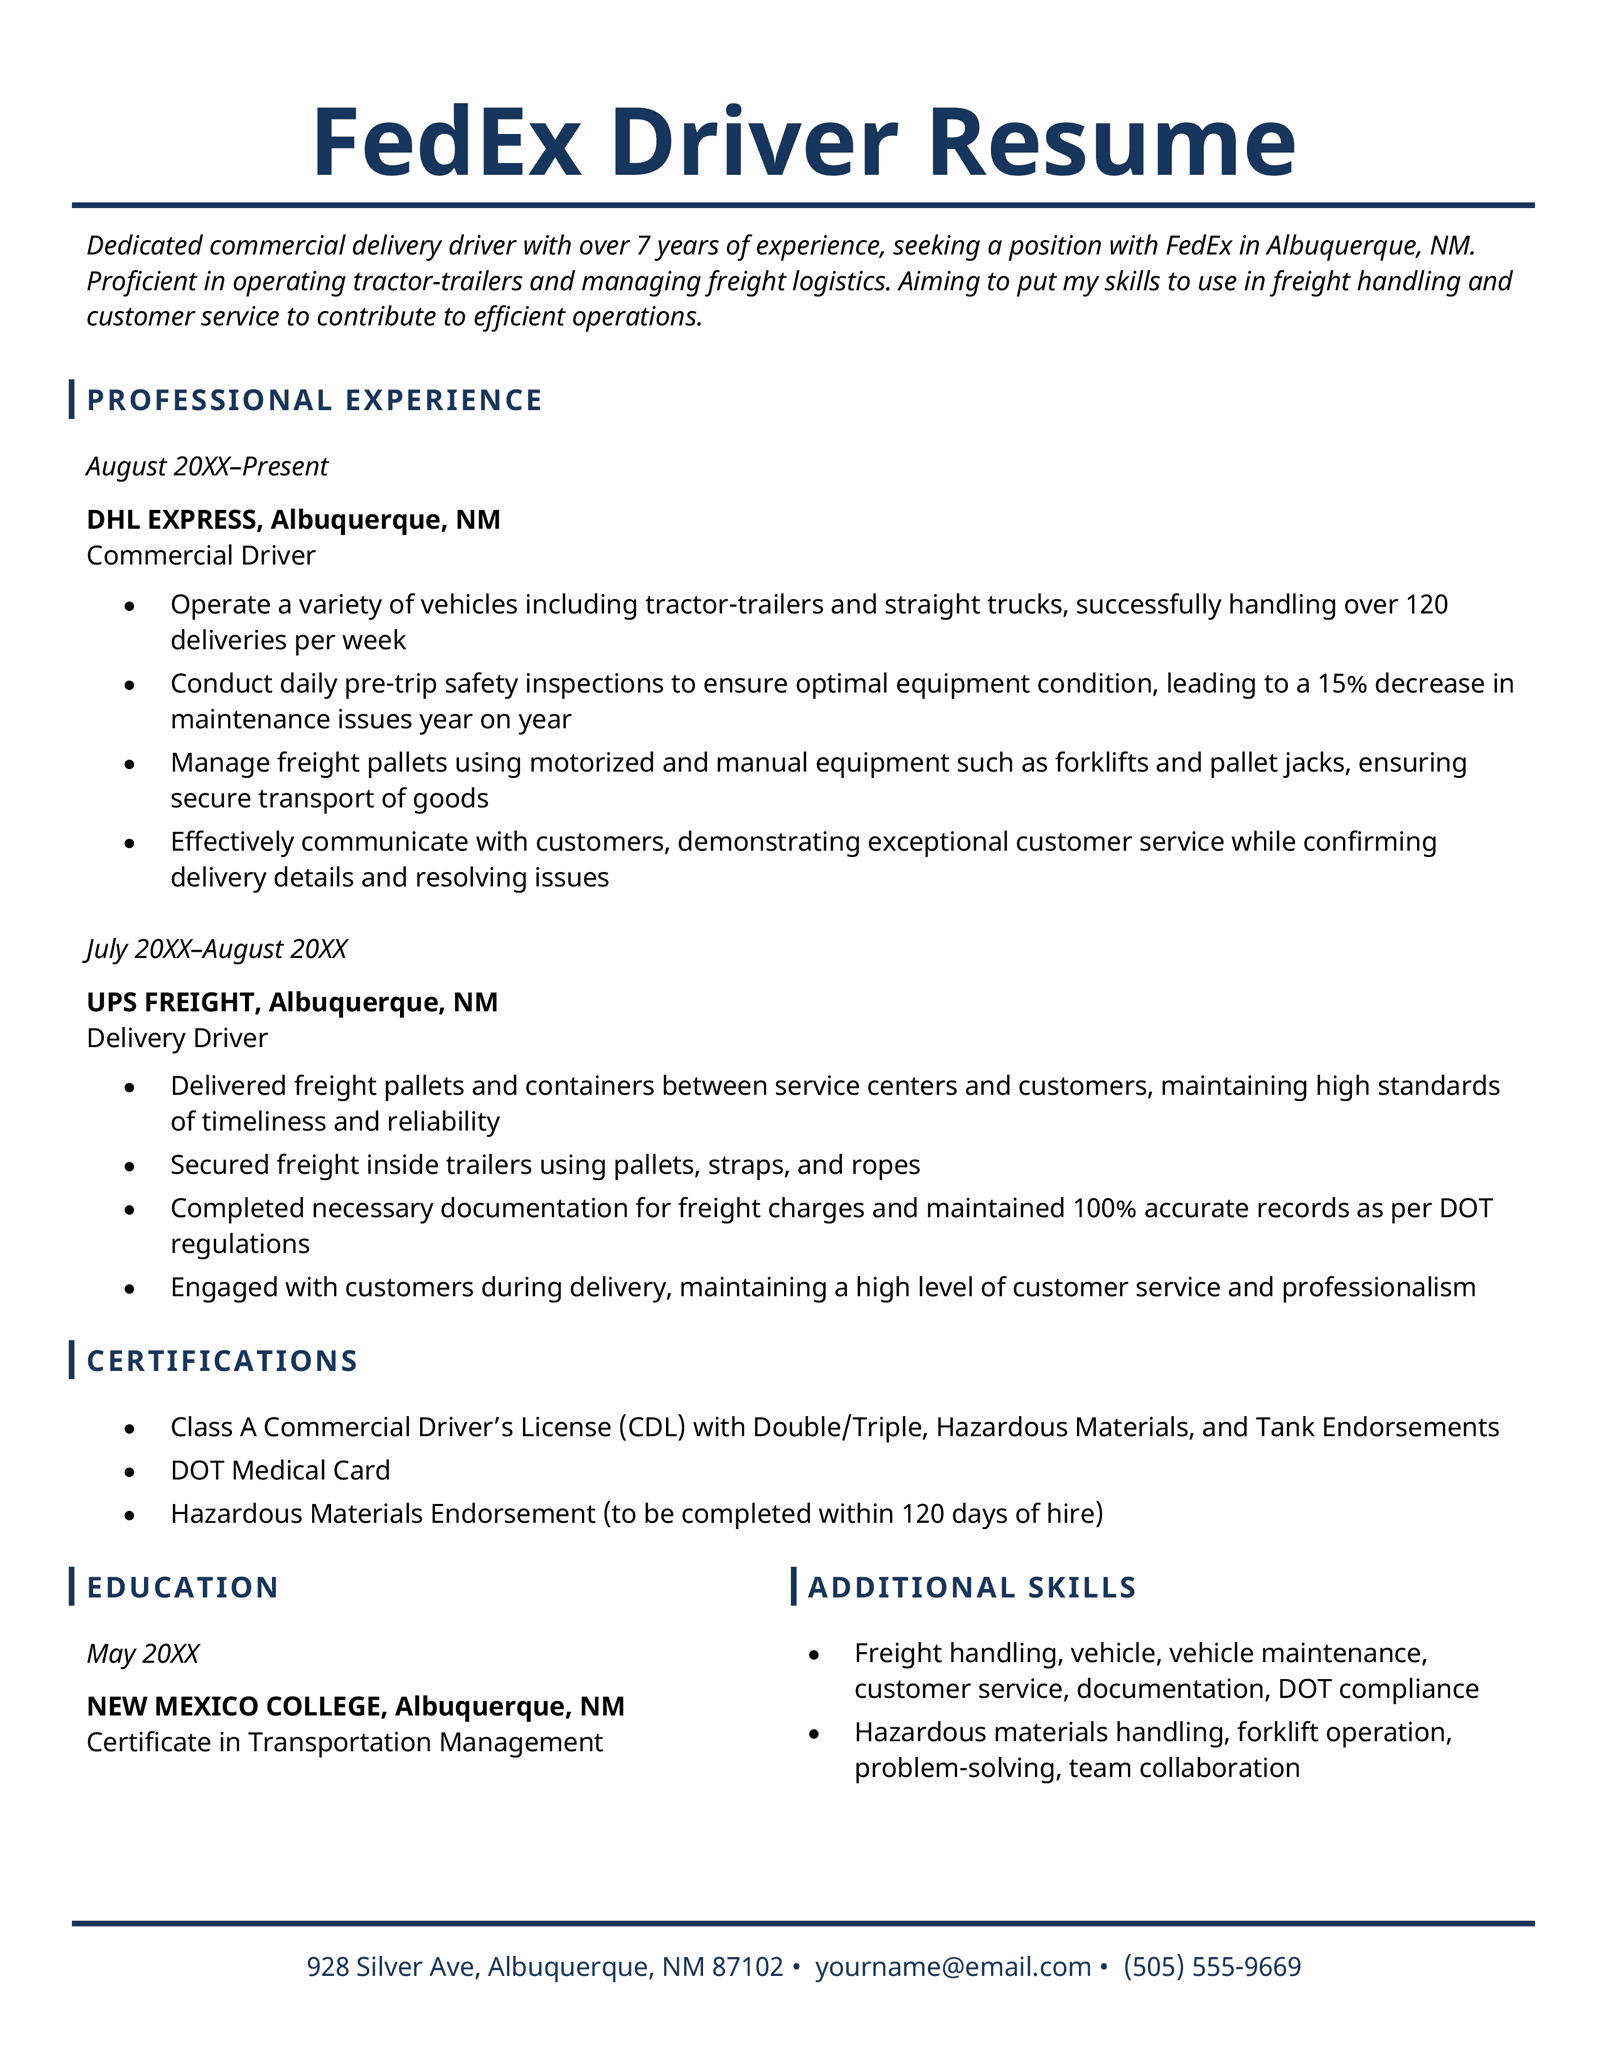 A FedEx driver resume that uses a blue color scheme and features plenty of space for work experience.